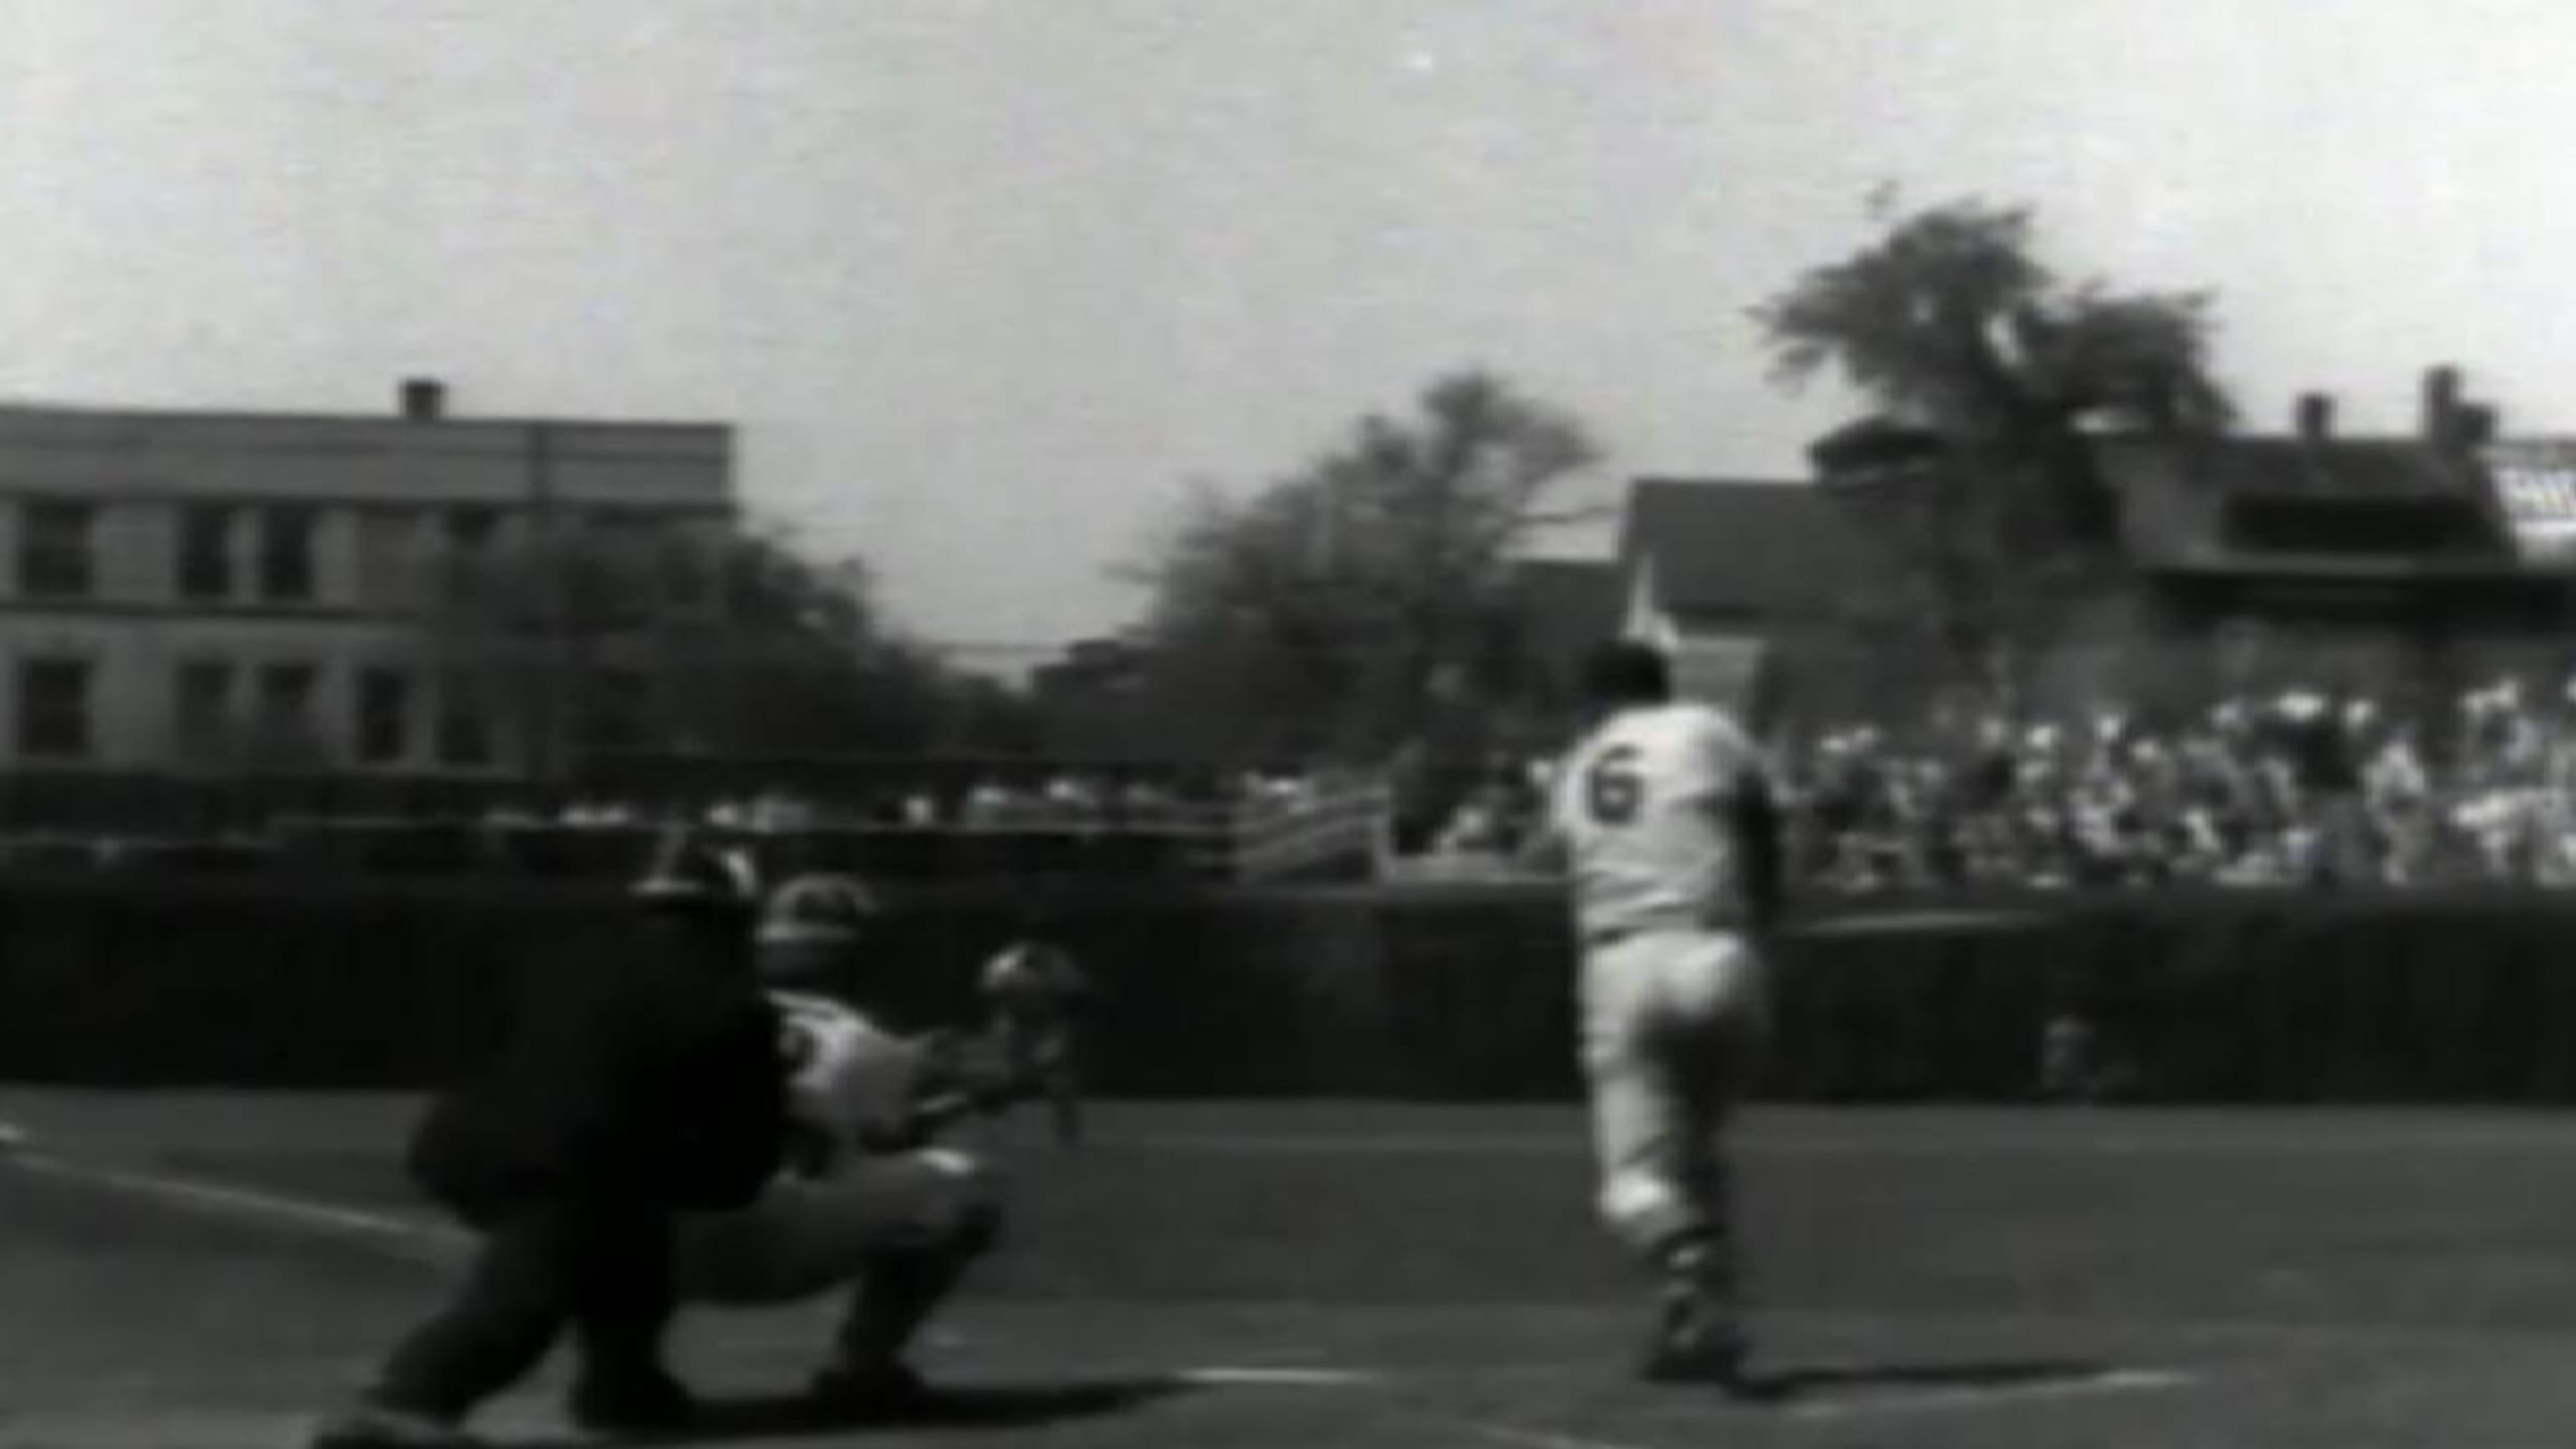 Musial's 3,000th hit